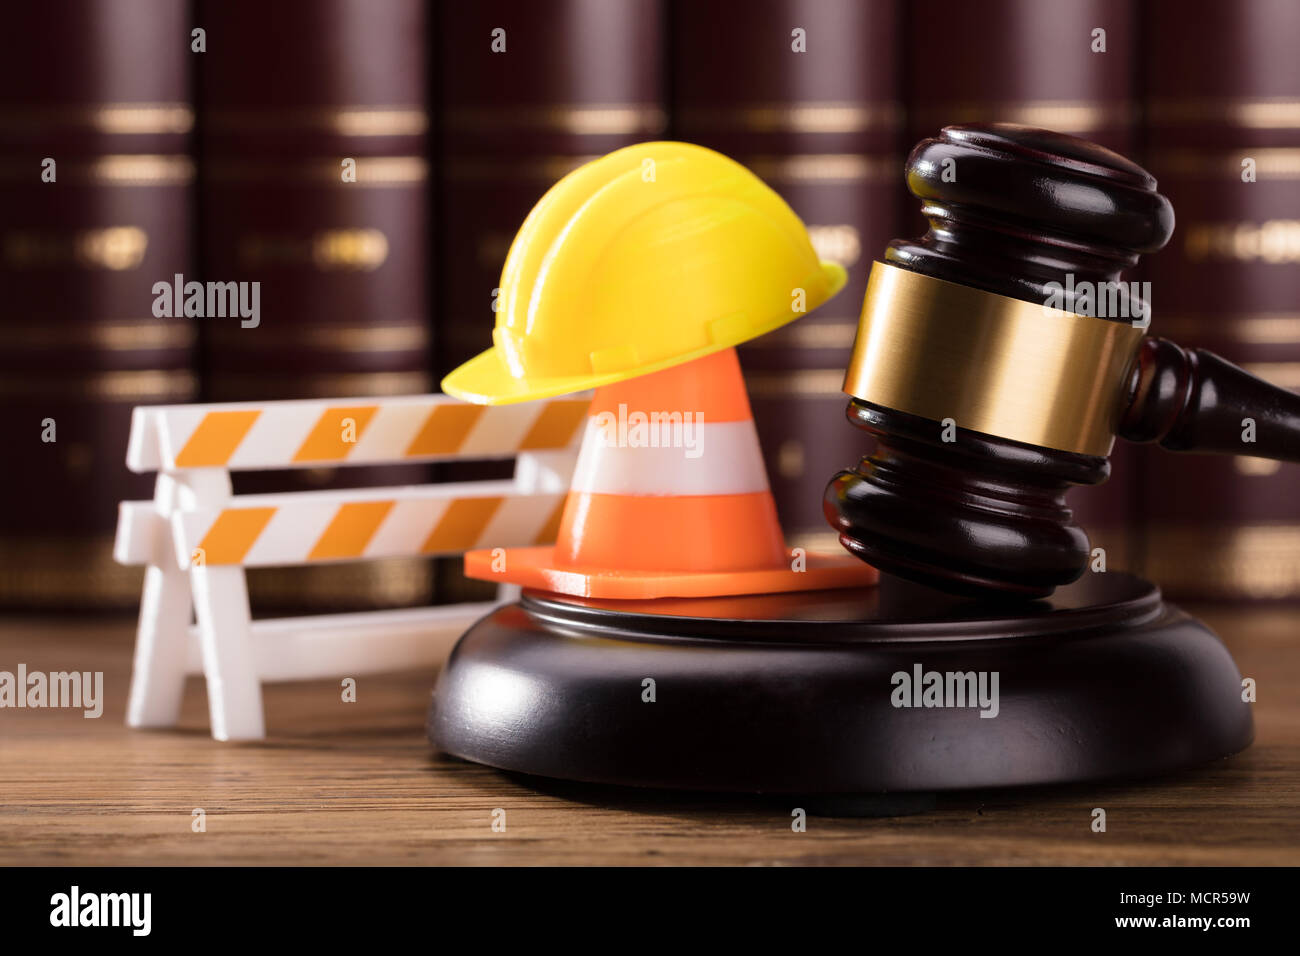 Close-up Of Mallet With Road Barrier, Yellow Hard Hat And Traffic Cone In Courtroom Stock Photo